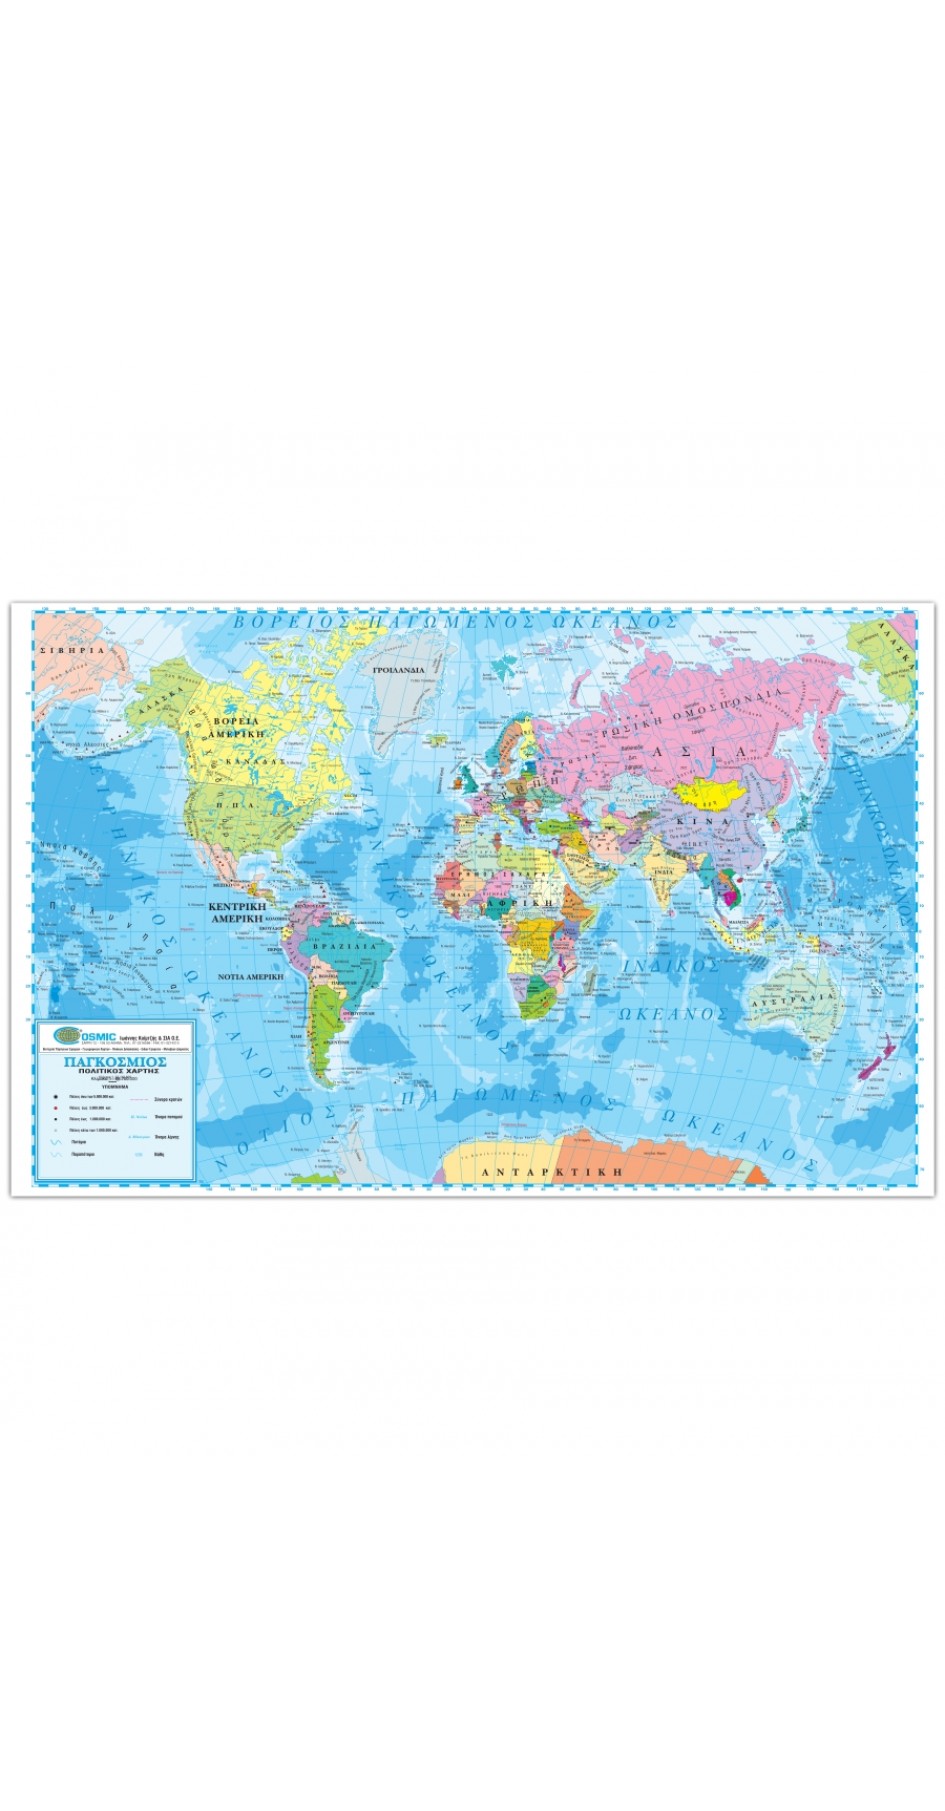 World map laminated (MAP IN GREEK)